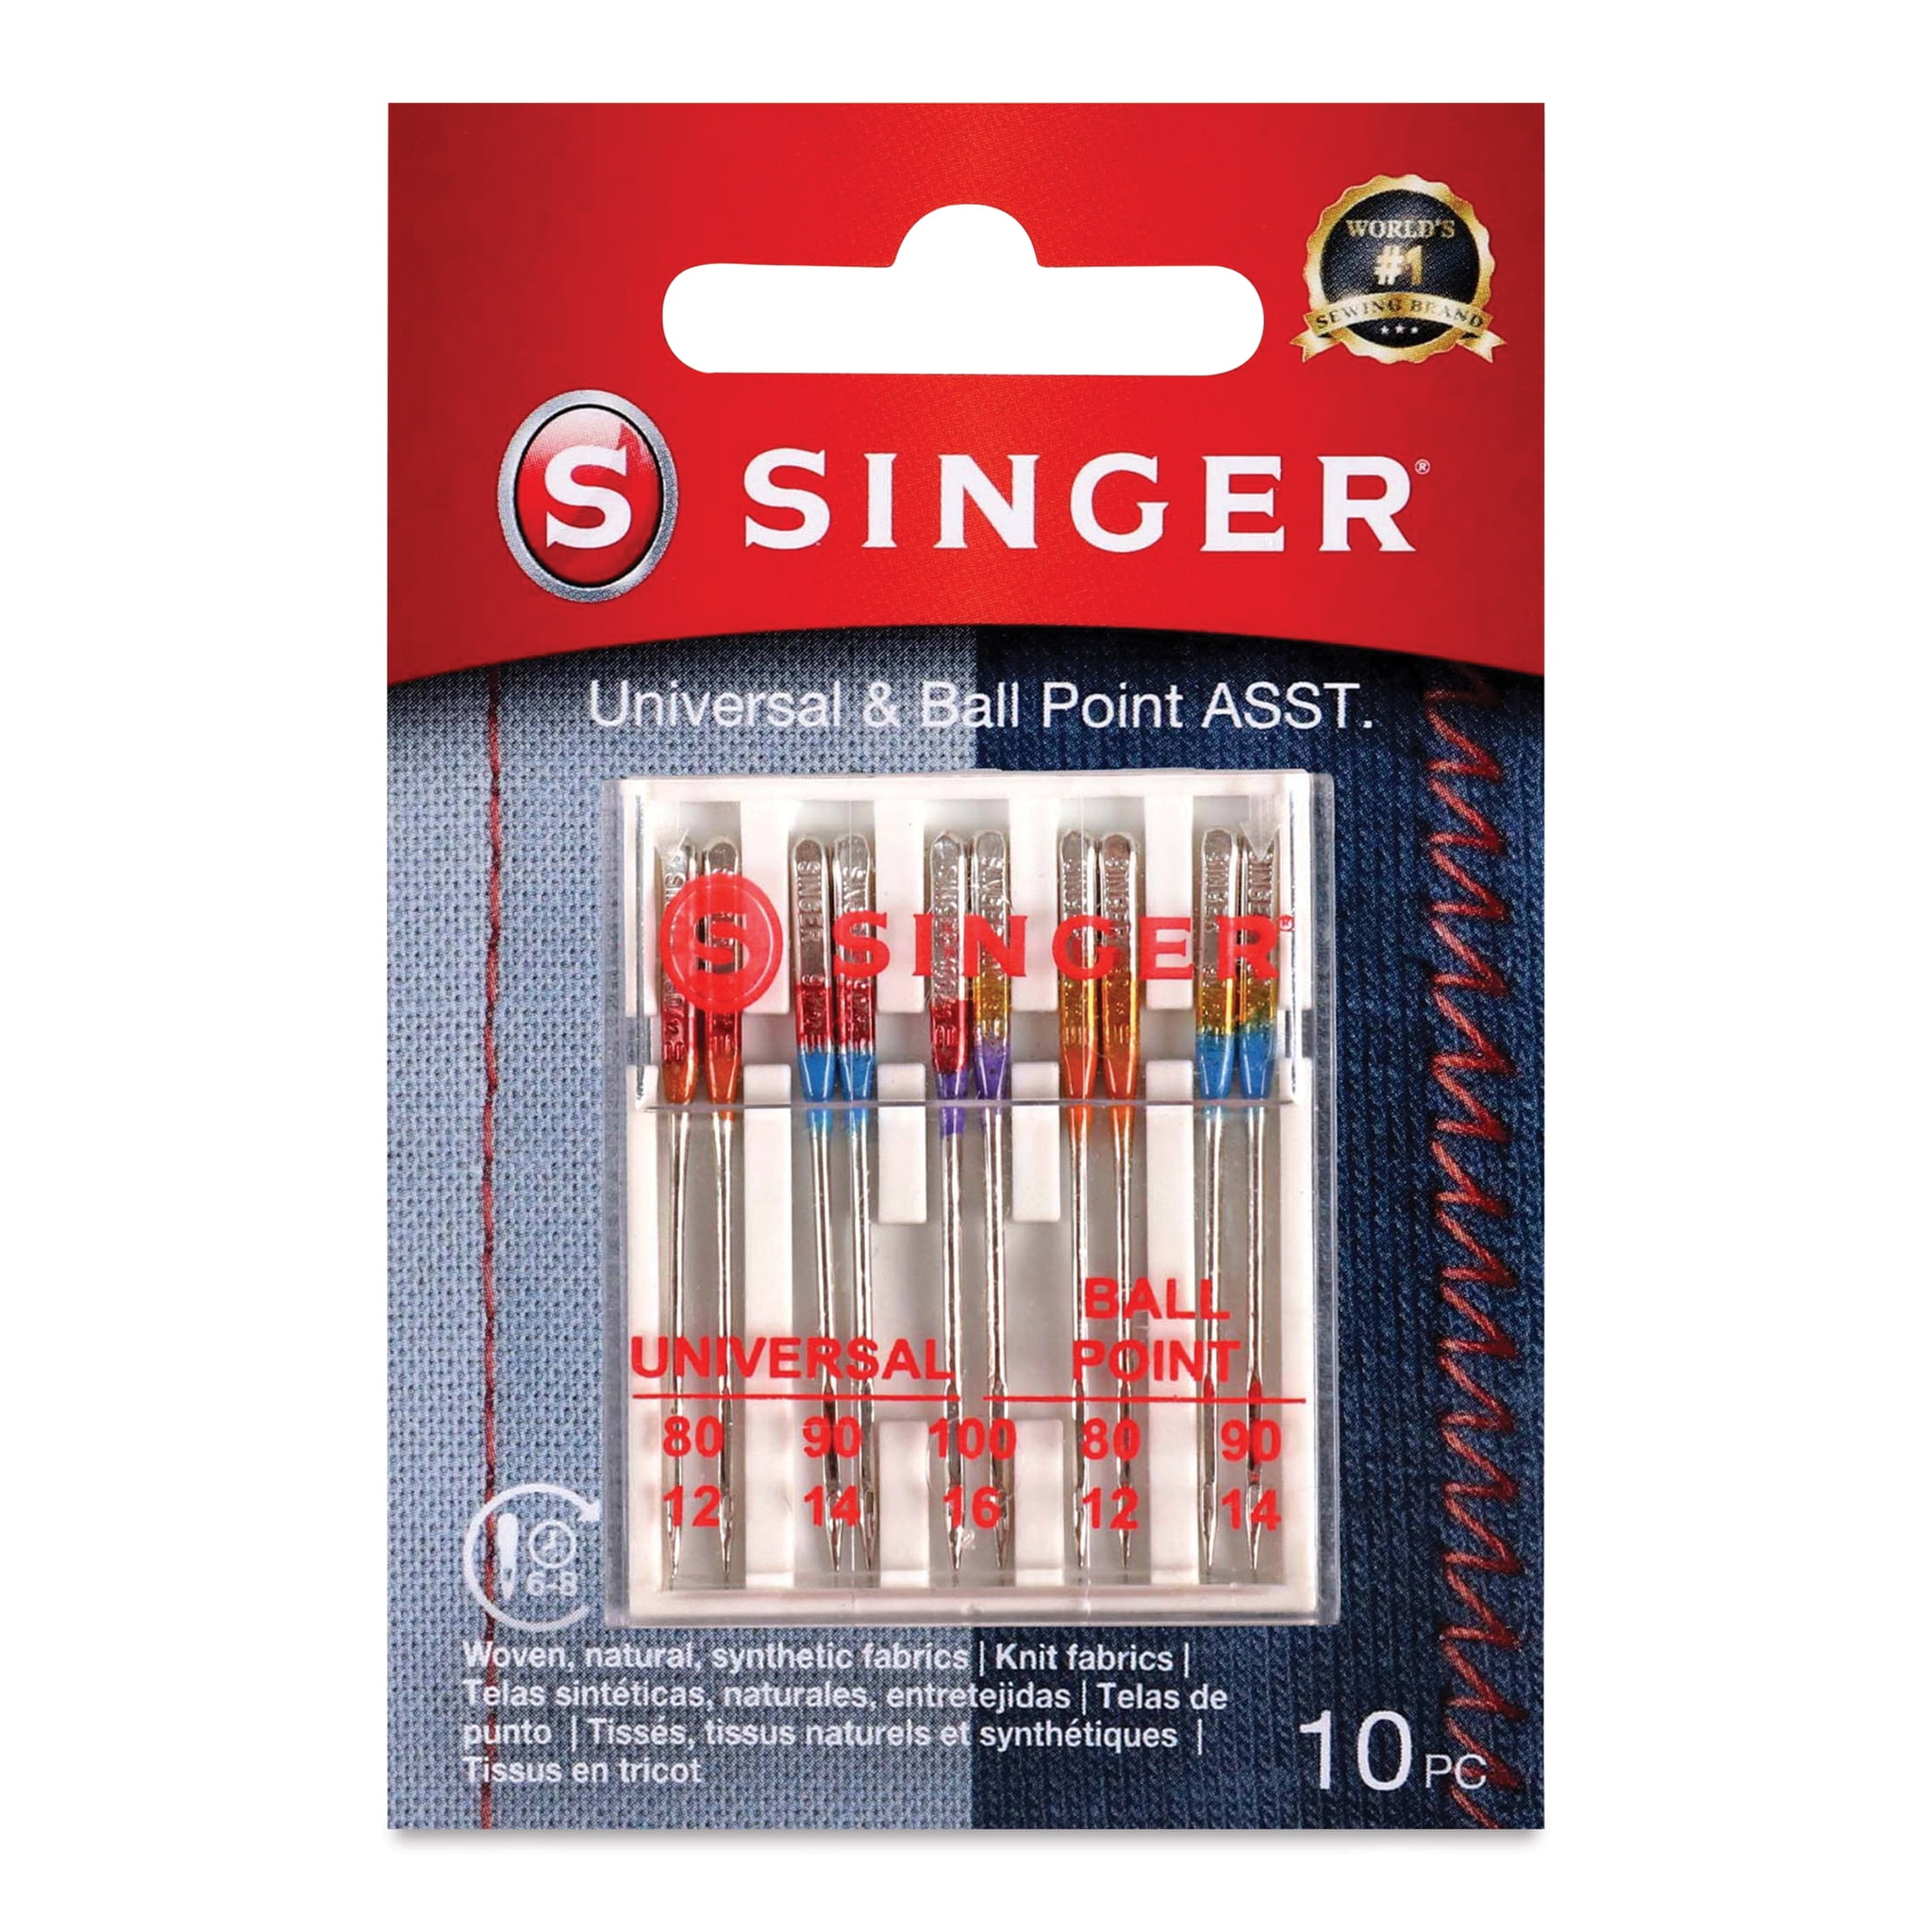 SINGER 04801 Universal Heavy Duty Sewing Machine Needles, 5-Count